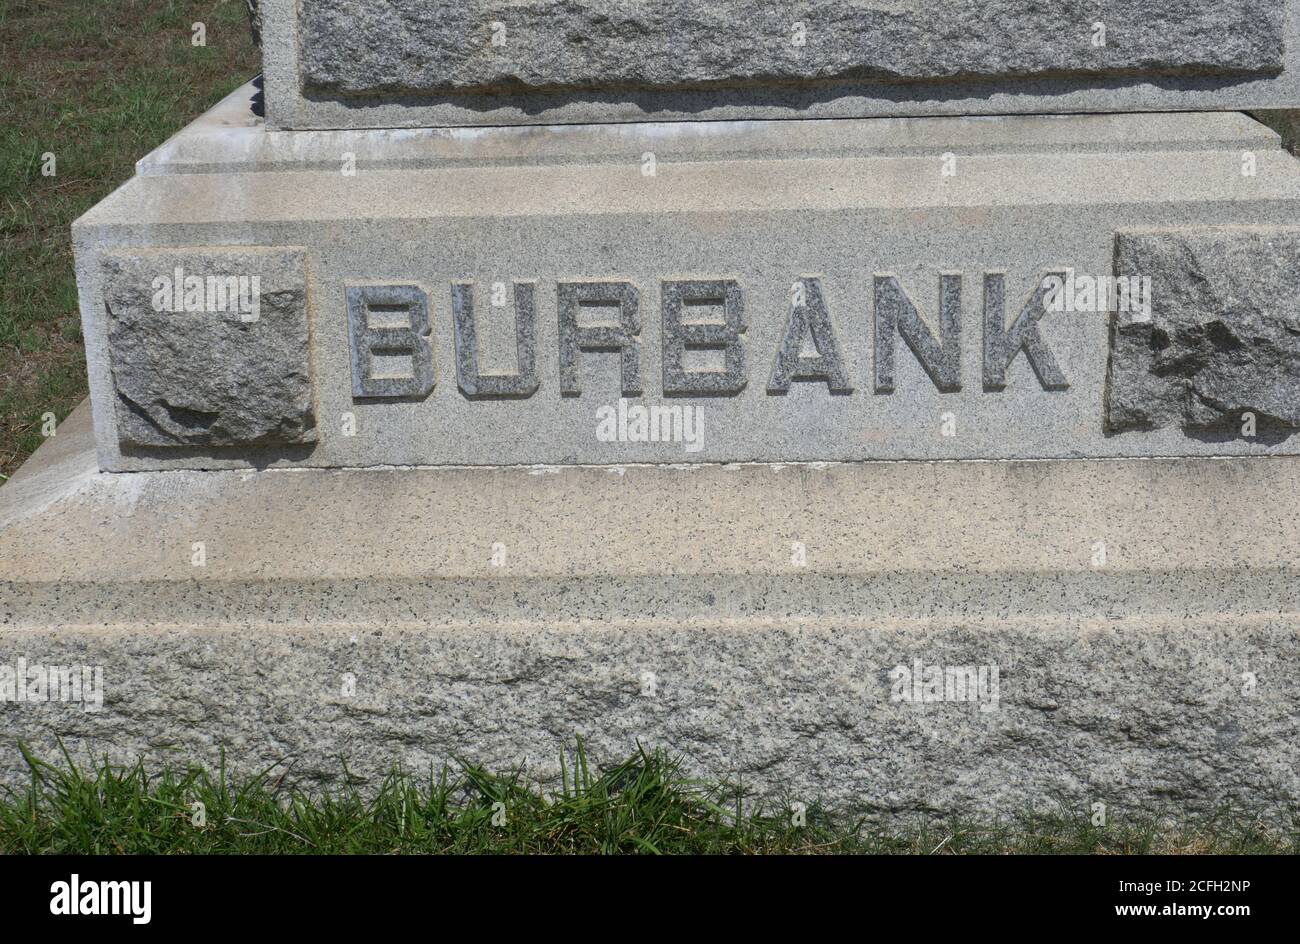 Los Angeles, California, USA 4th September 2020 A general view of atmosphere of David Burbank's Grave at Angelus-Rosedale Cemetery on September 4, 2020 in Los Angeles, California, USA. Photo by Barry King/Alamy Stock Photo Stock Photo